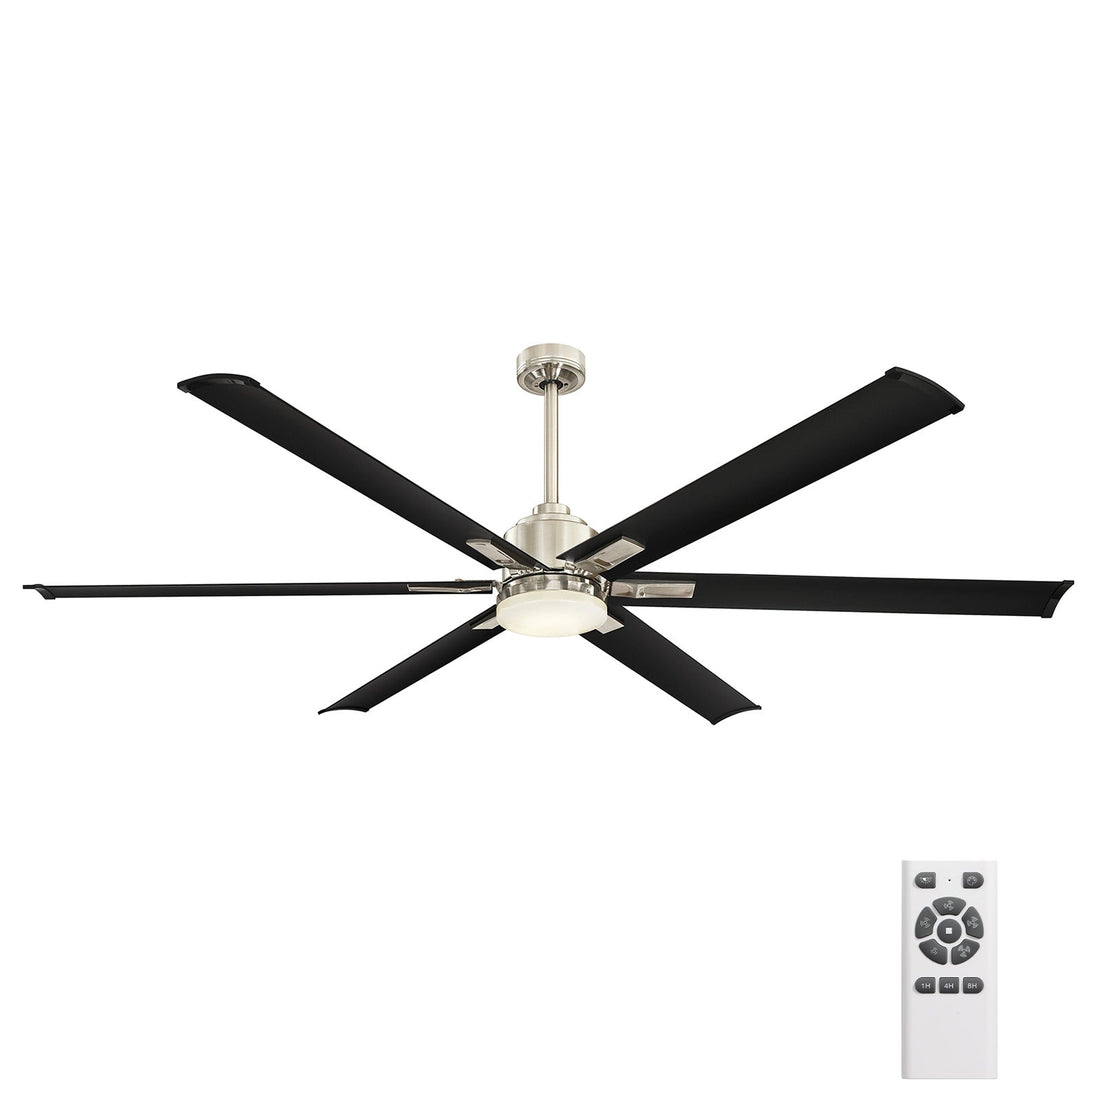 Rhino 2.1m DC Ceiling Fan with LED Light and Remote Mercator